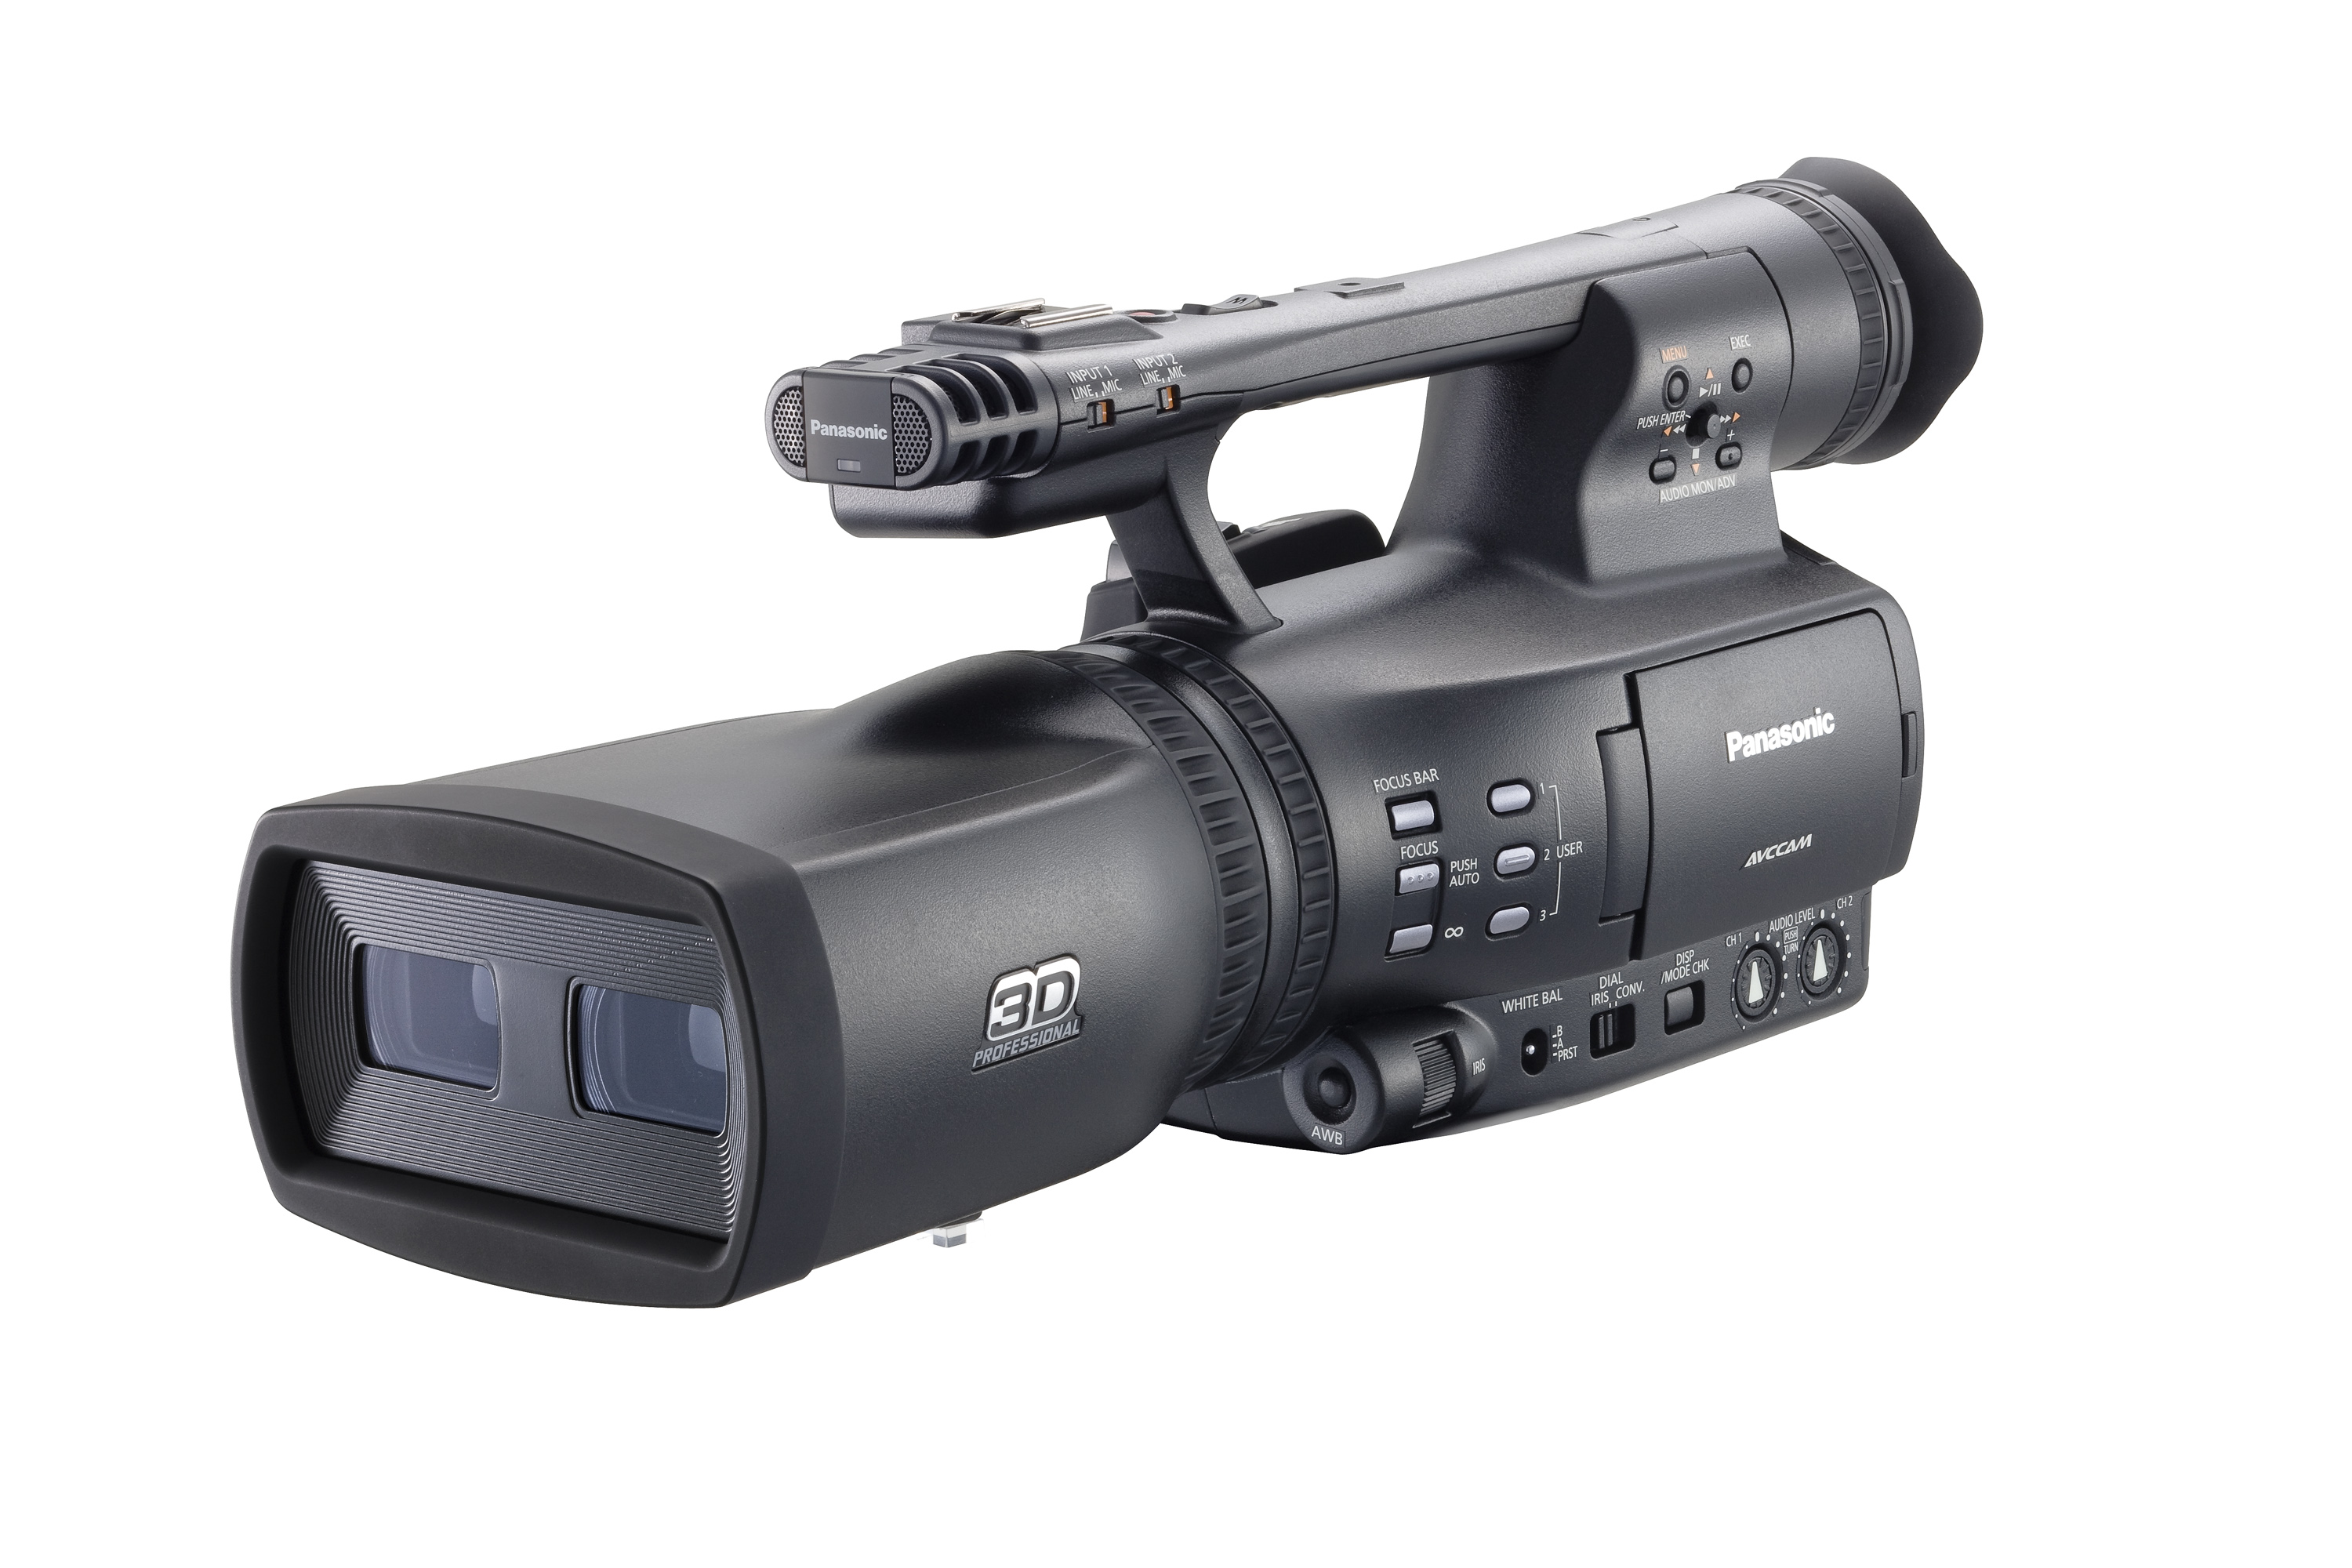 [Image of Panasonic AG-3DA1 3D video camera, distinct from standard video cameras by having two lenses to capture two images.]